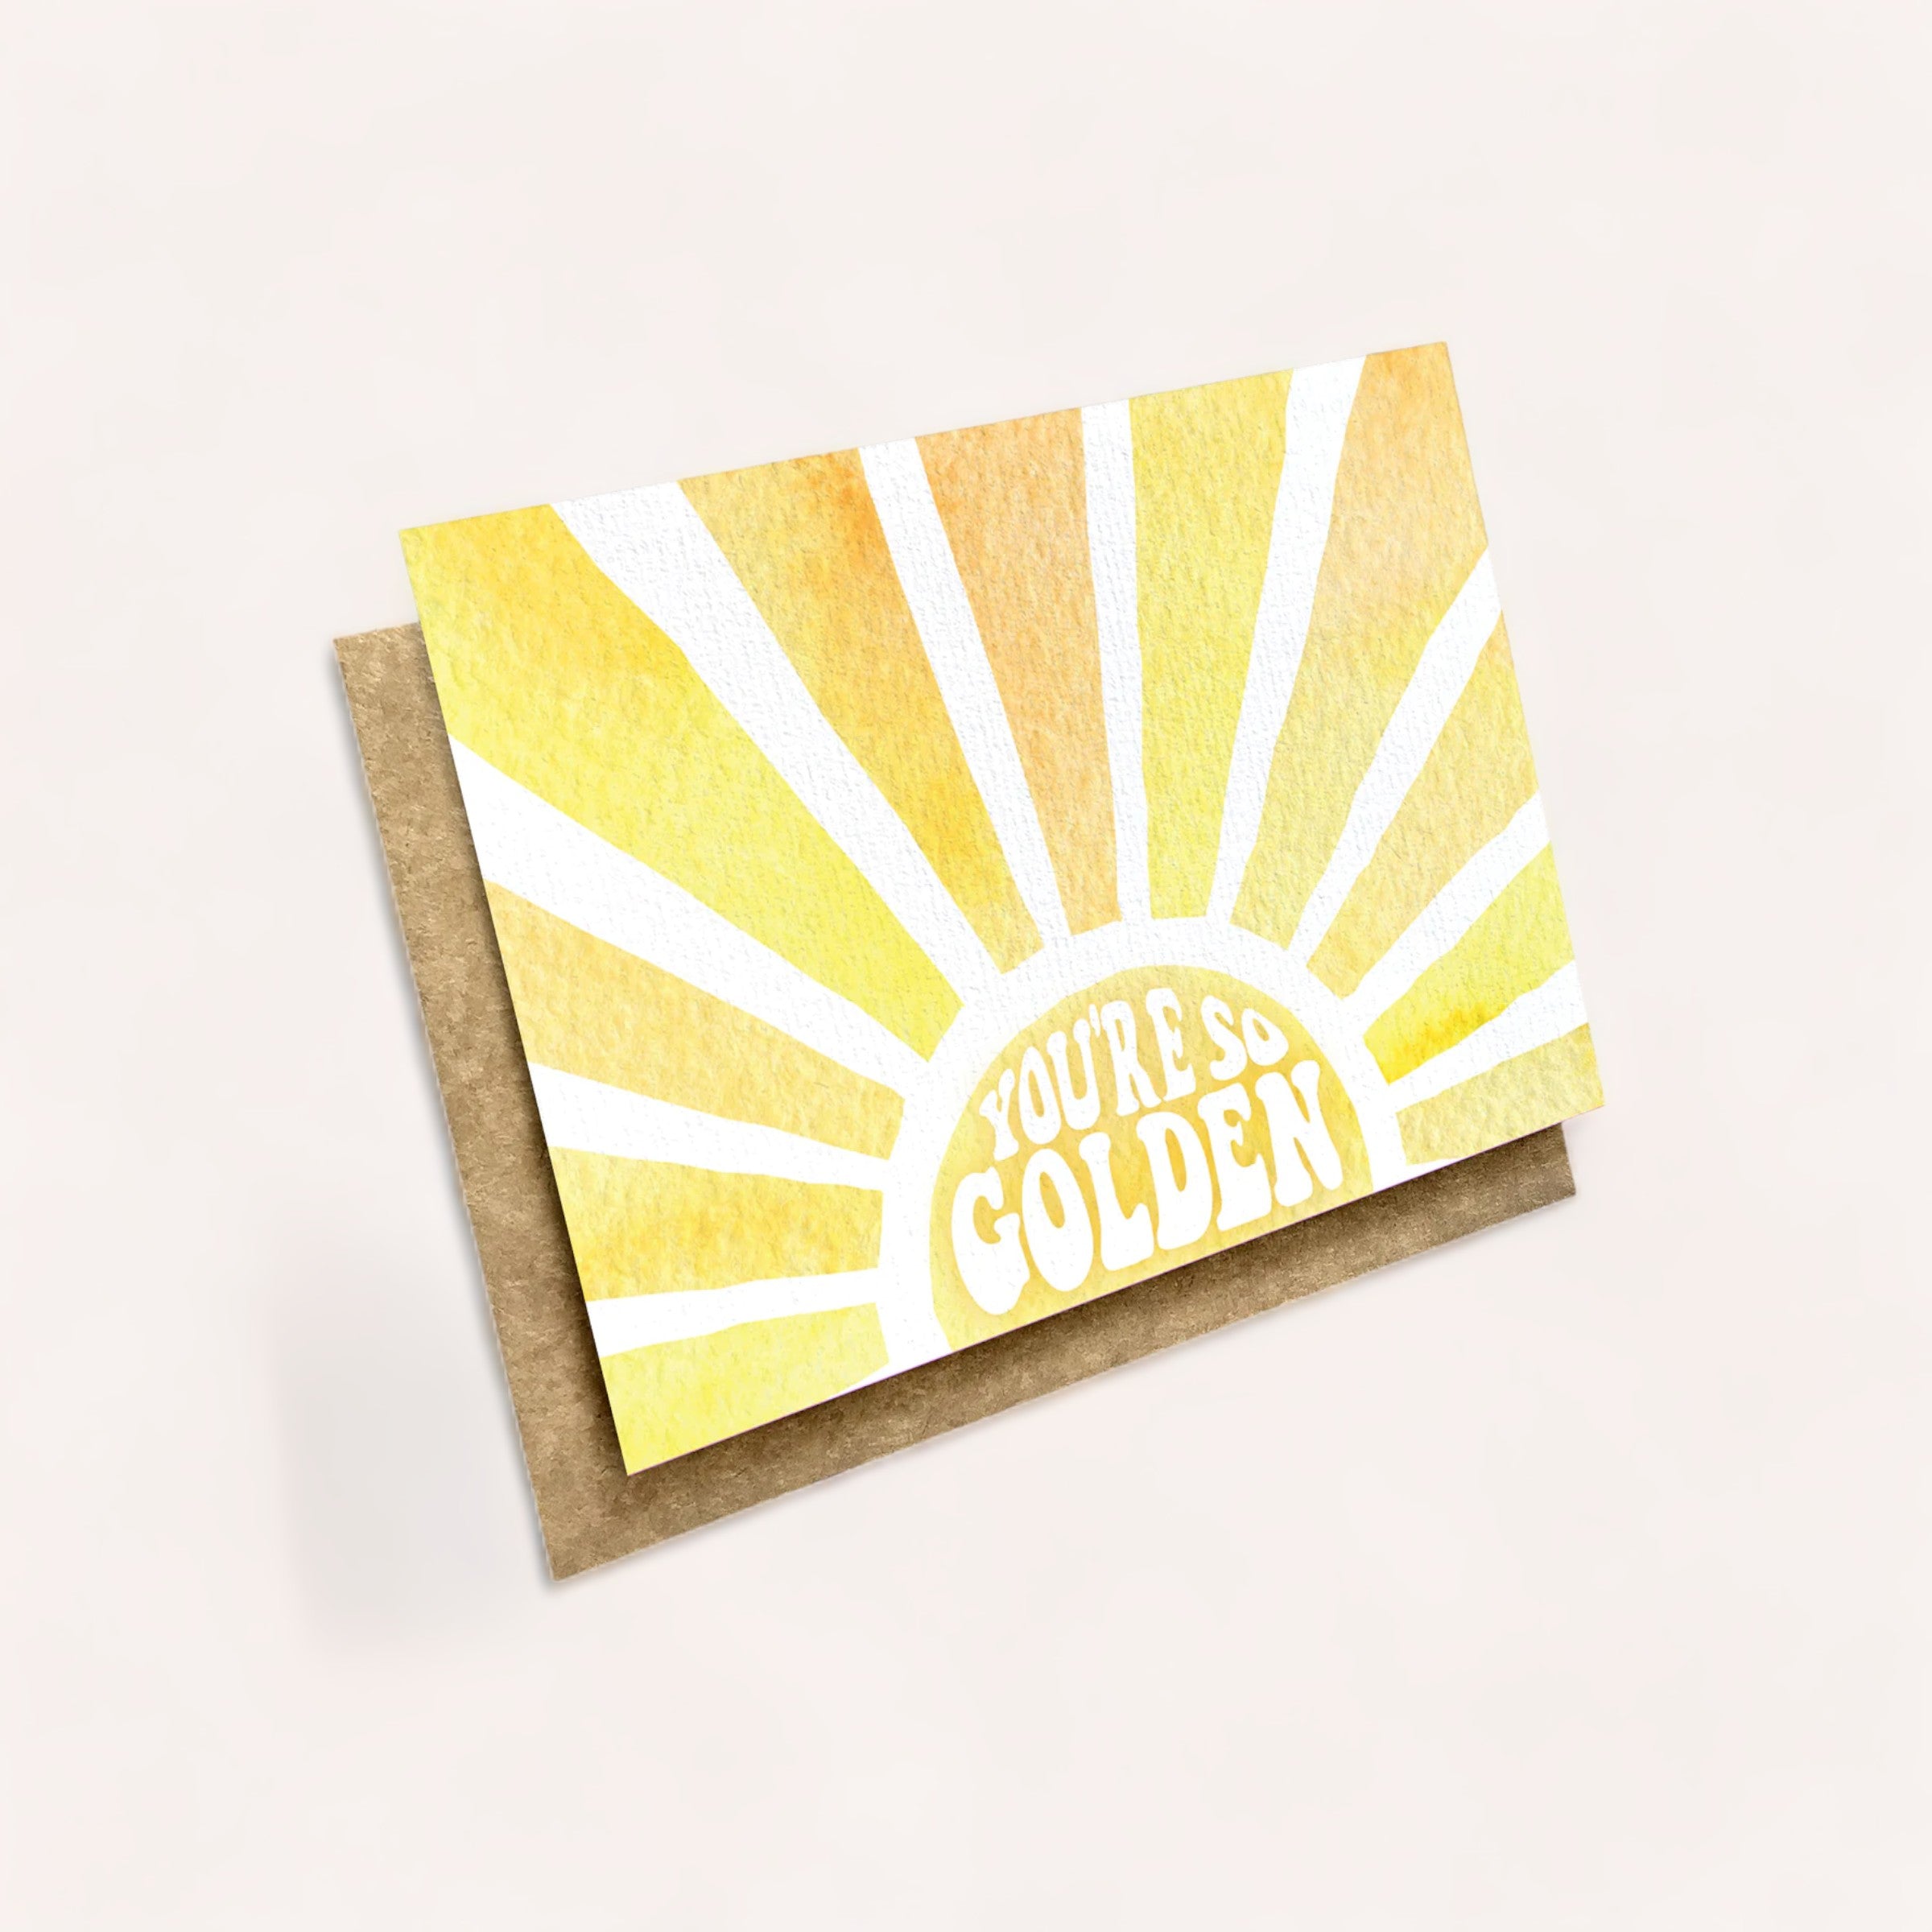 An uplifting You're So Golden Card with a radiant golden sunburst design and the positive affirmation "you're so golden" proudly displayed in the center. This Ink Bomb product of New Zealand is perfect for any occasion.